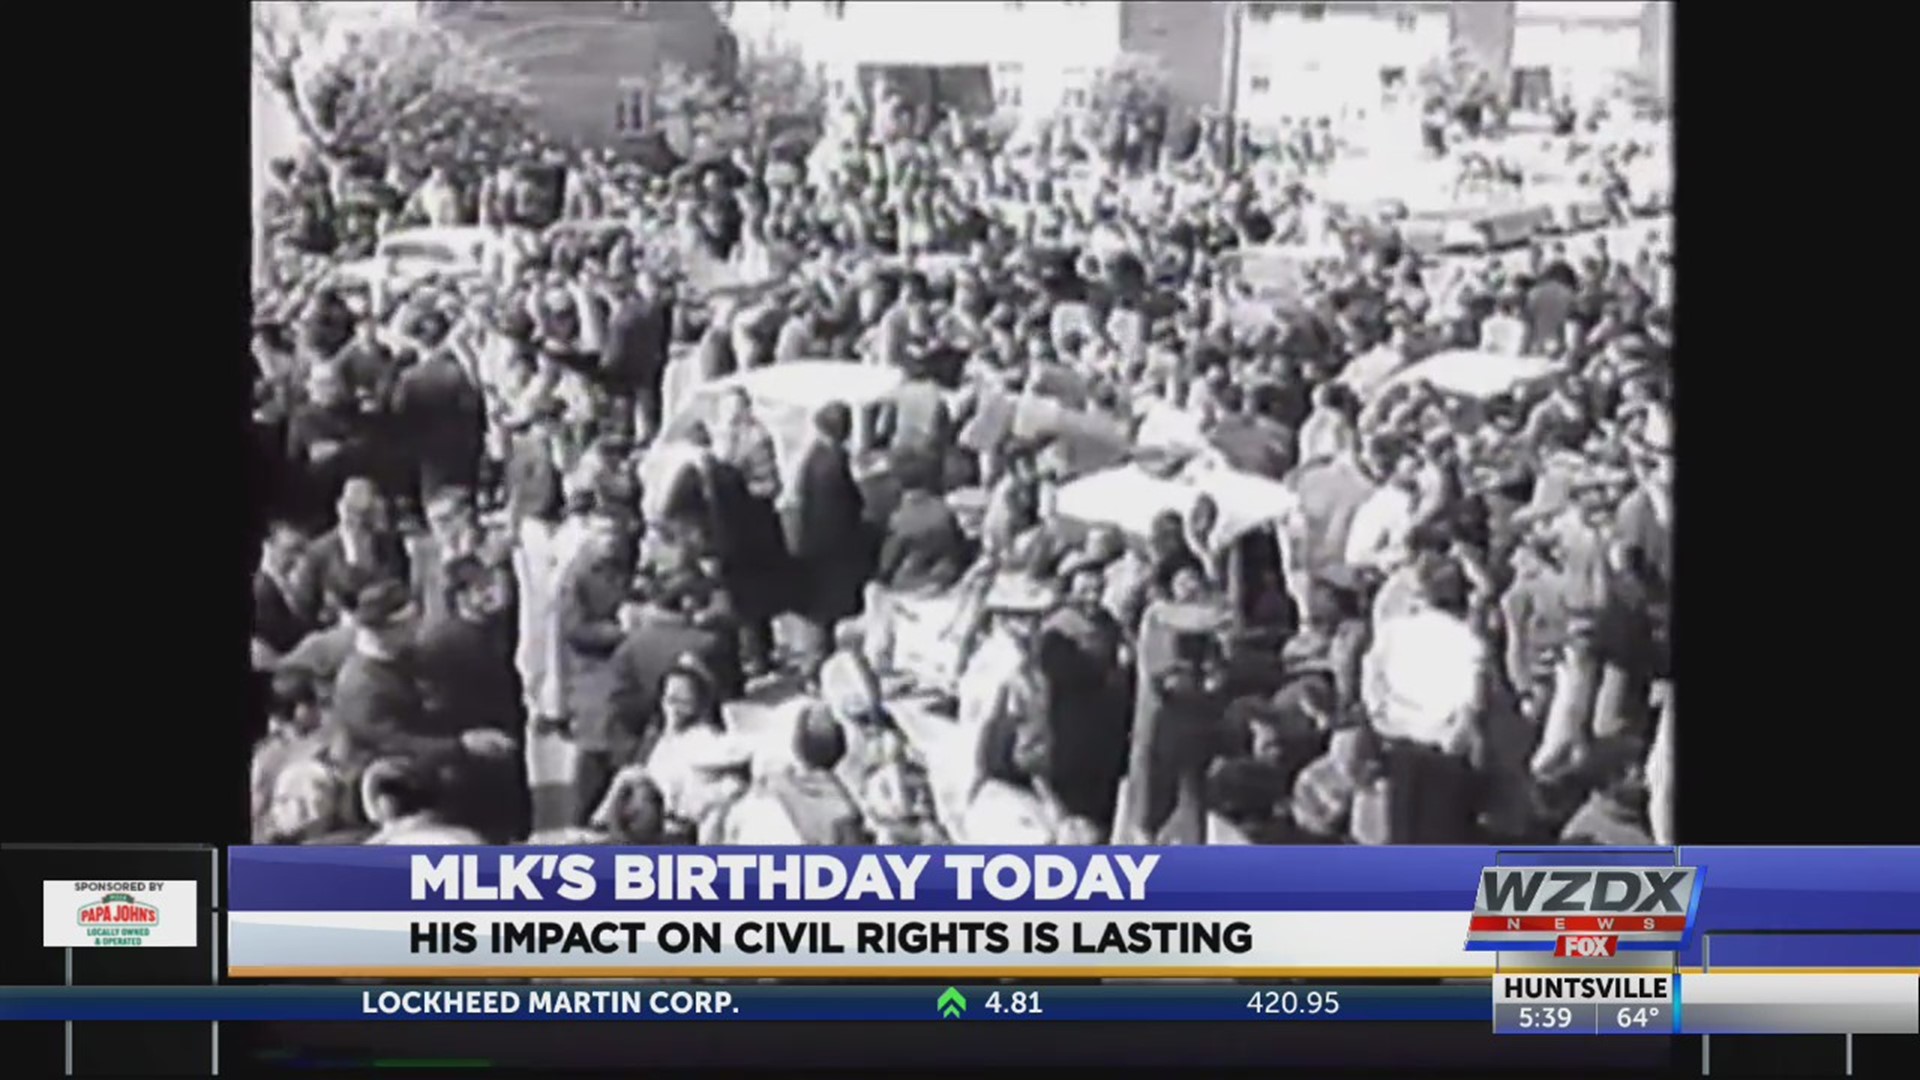 Many people in Huntsville are taking the day to remember MLK and the injustices he fought.